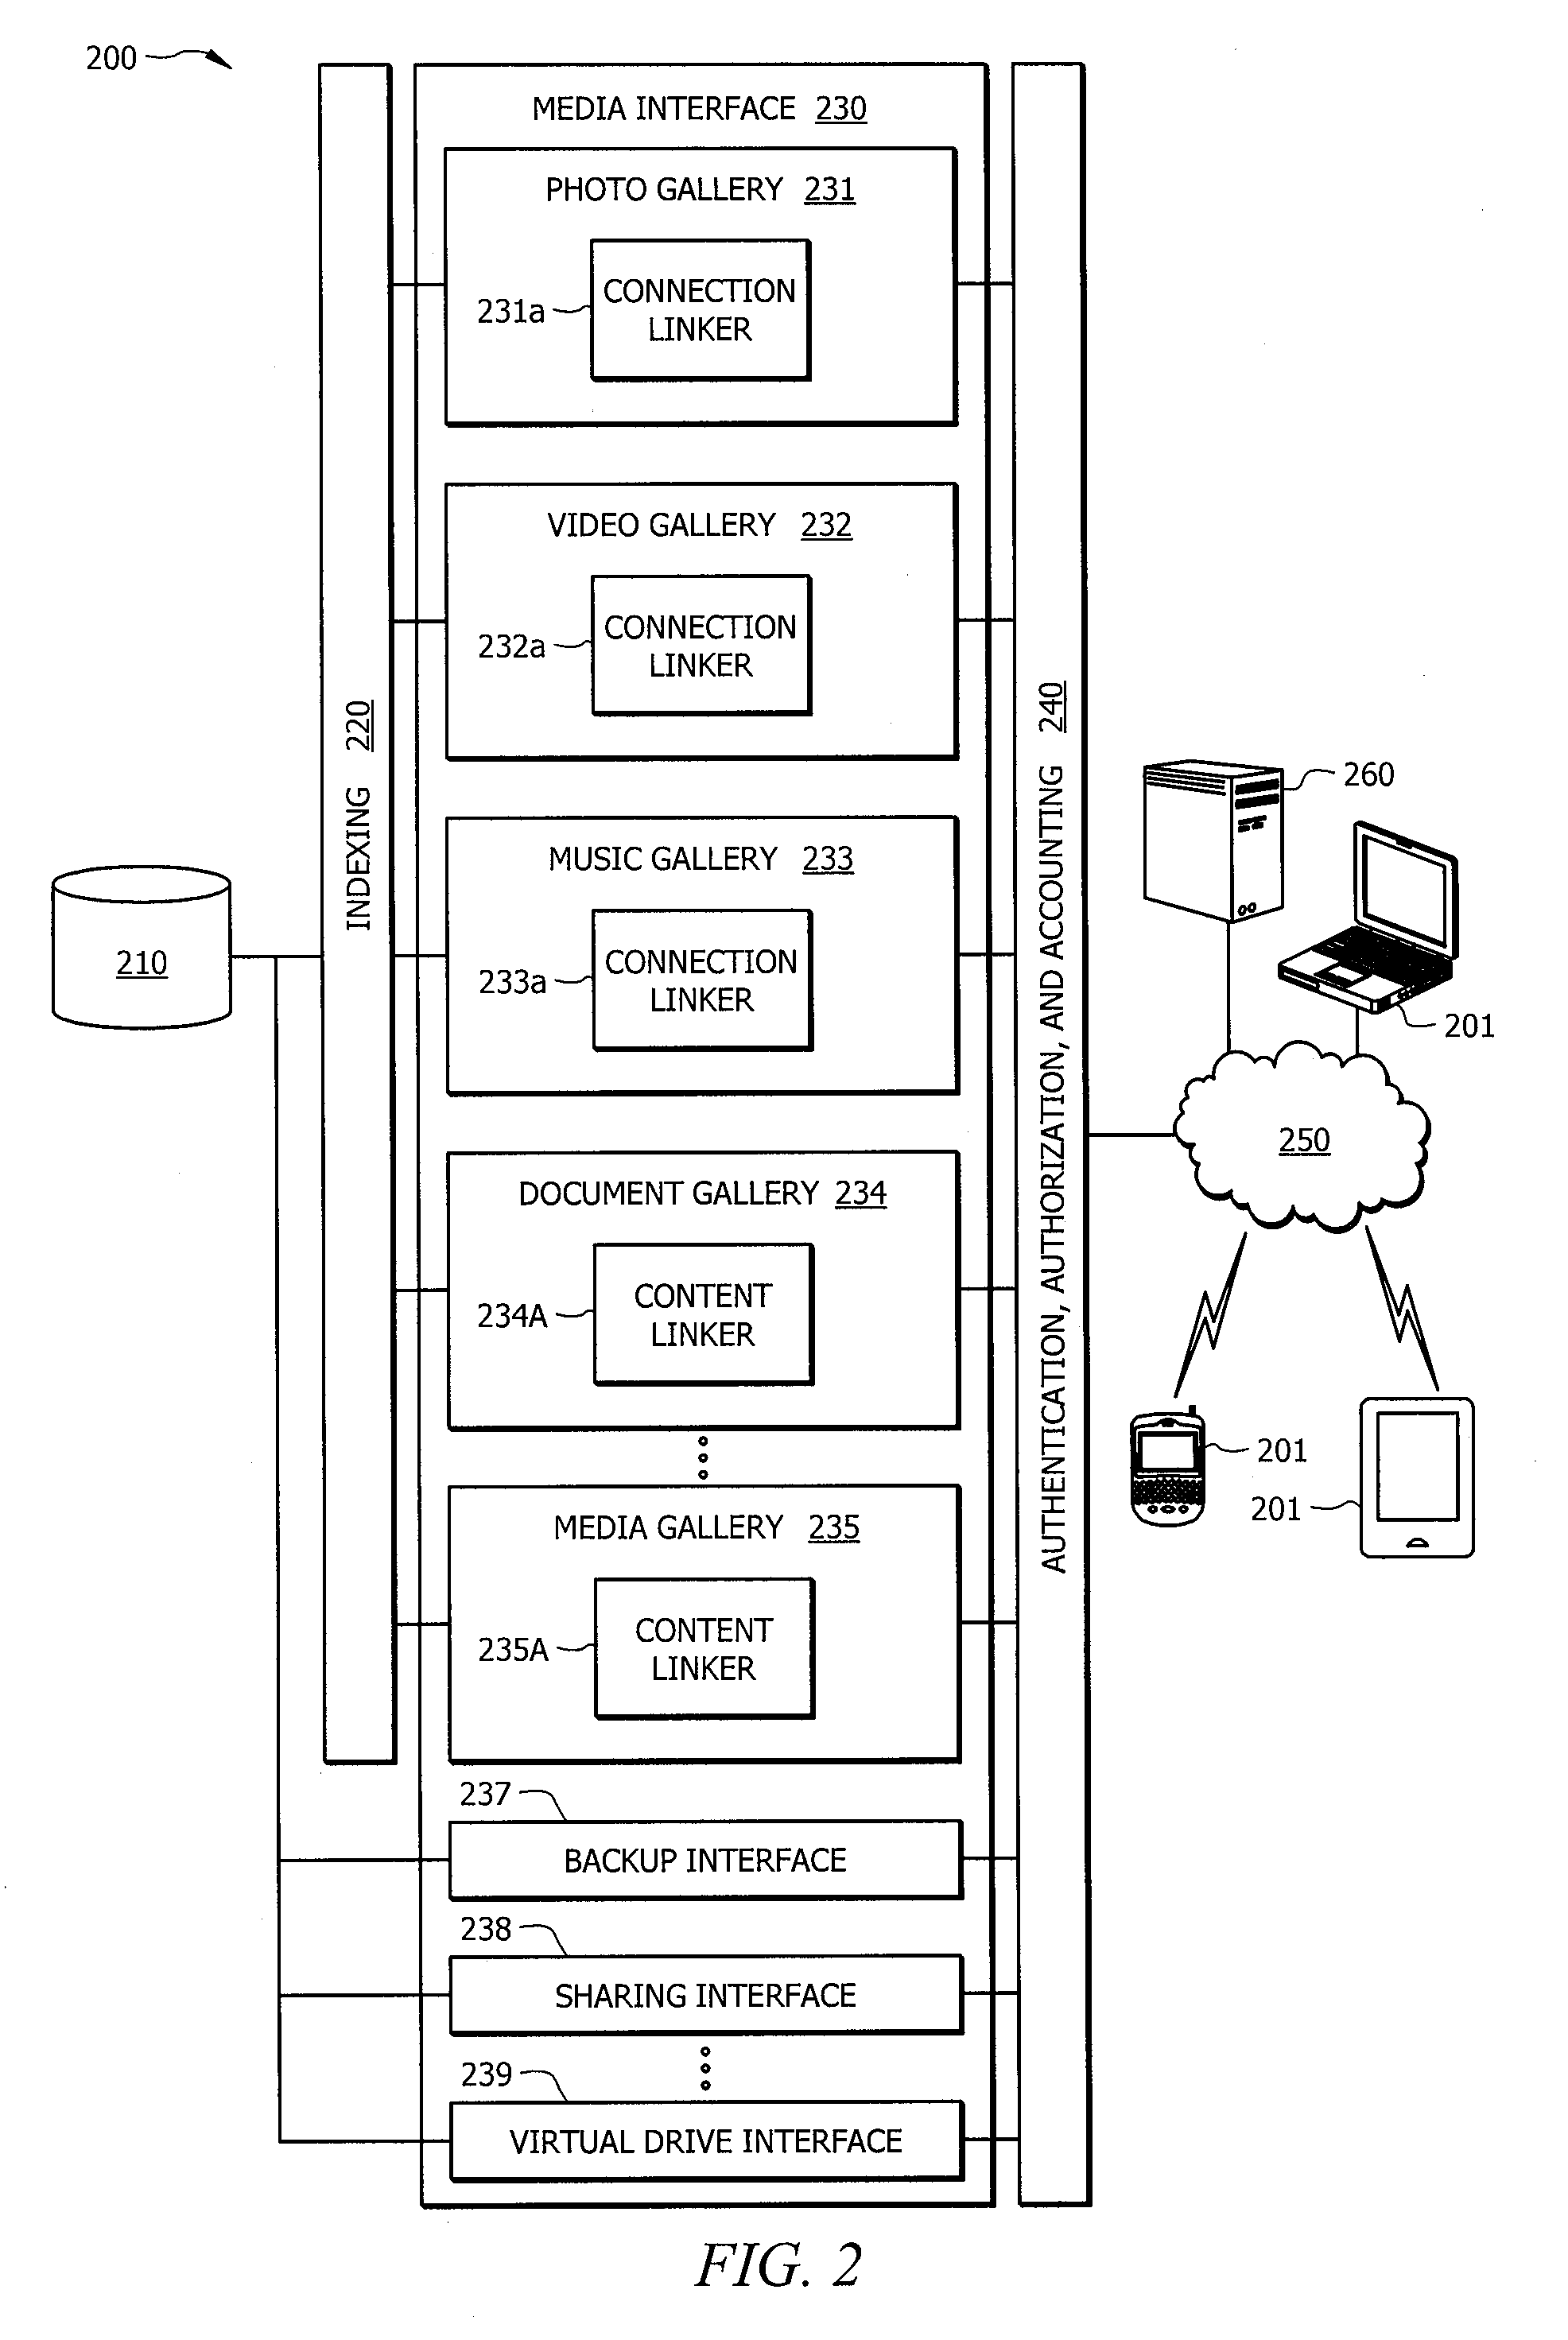 Systems and methods providing media-to-media connection